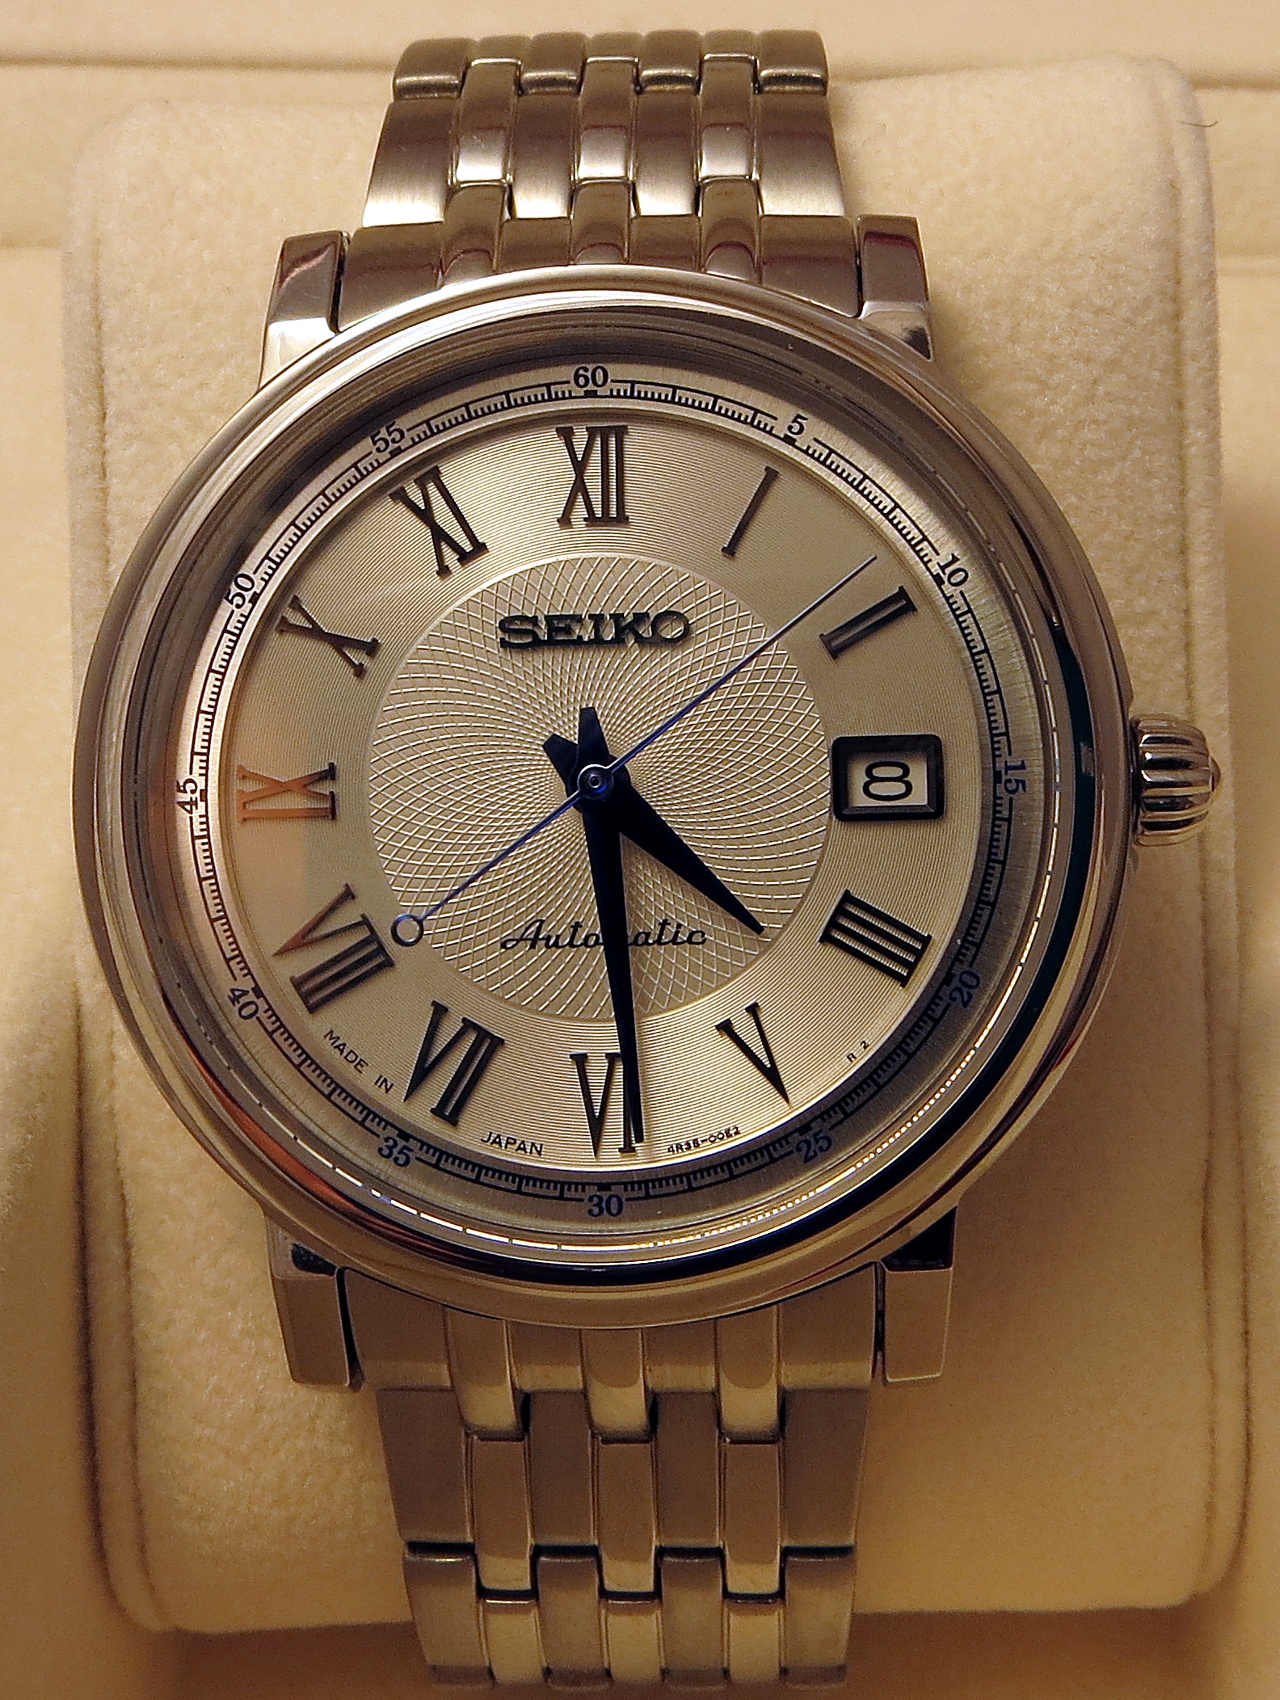 Watch Review, Seiko SARY005 – Watches at 